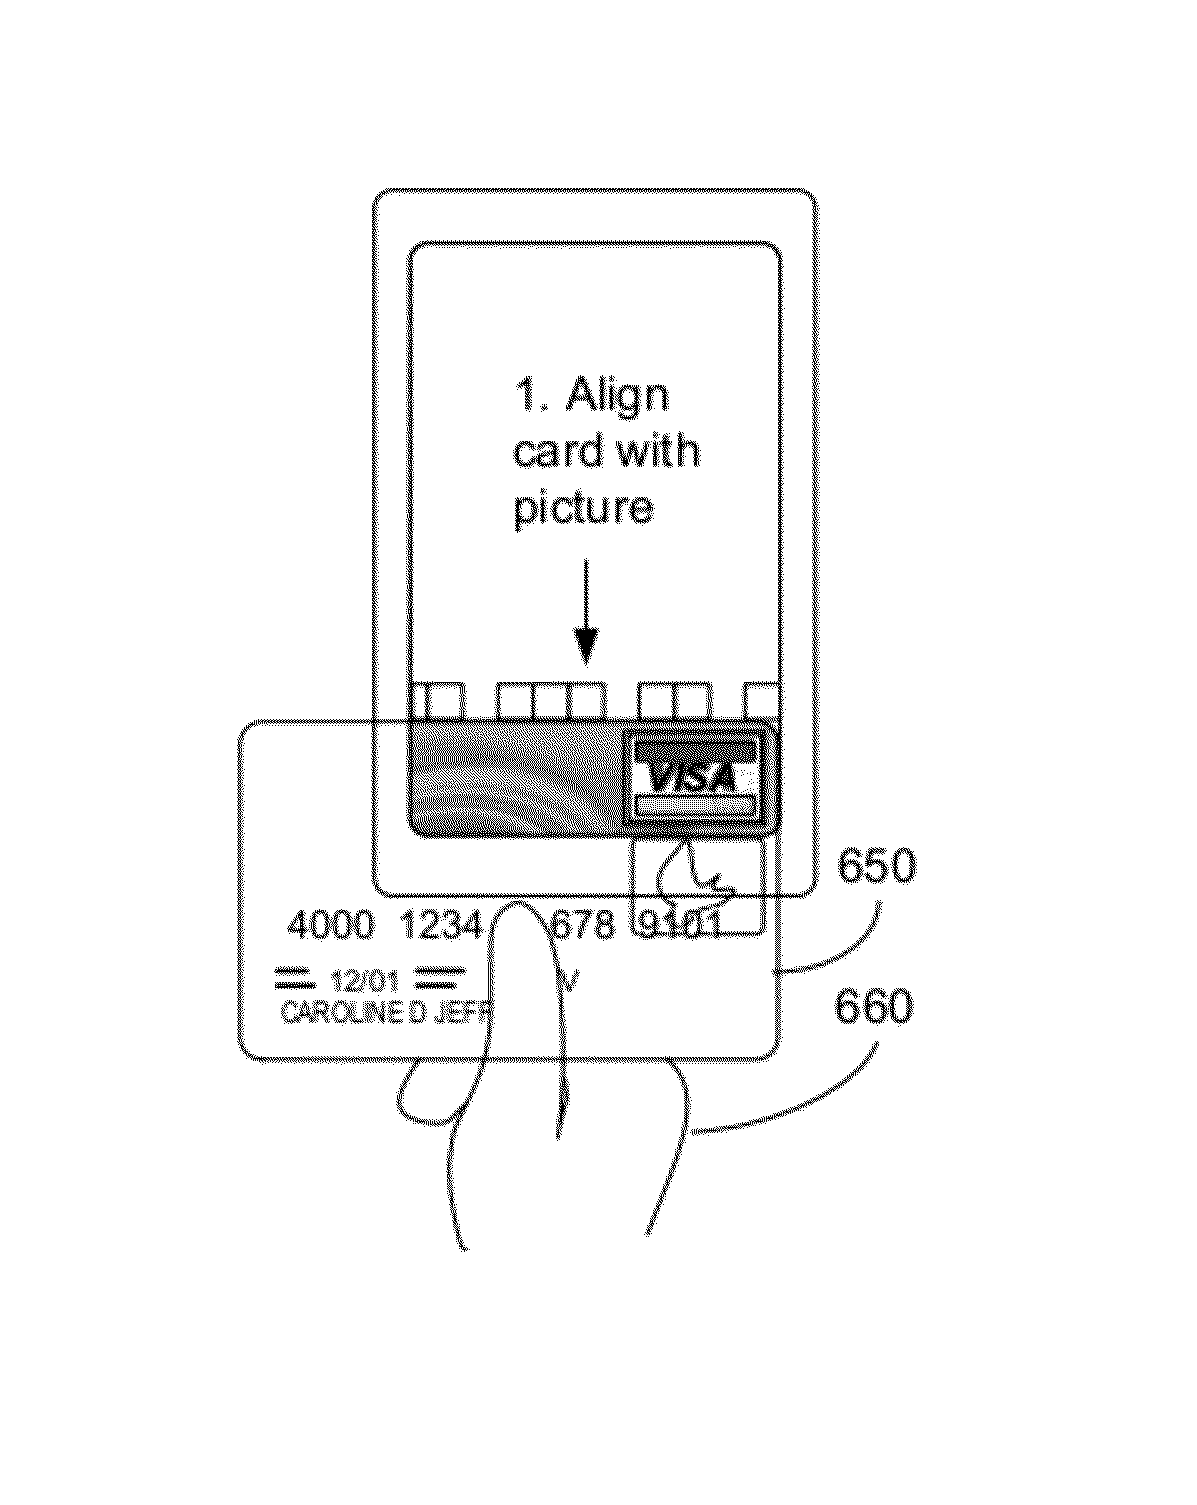 Methods and apparatus for facilitating capture of magnetic credit card data on a hand held device